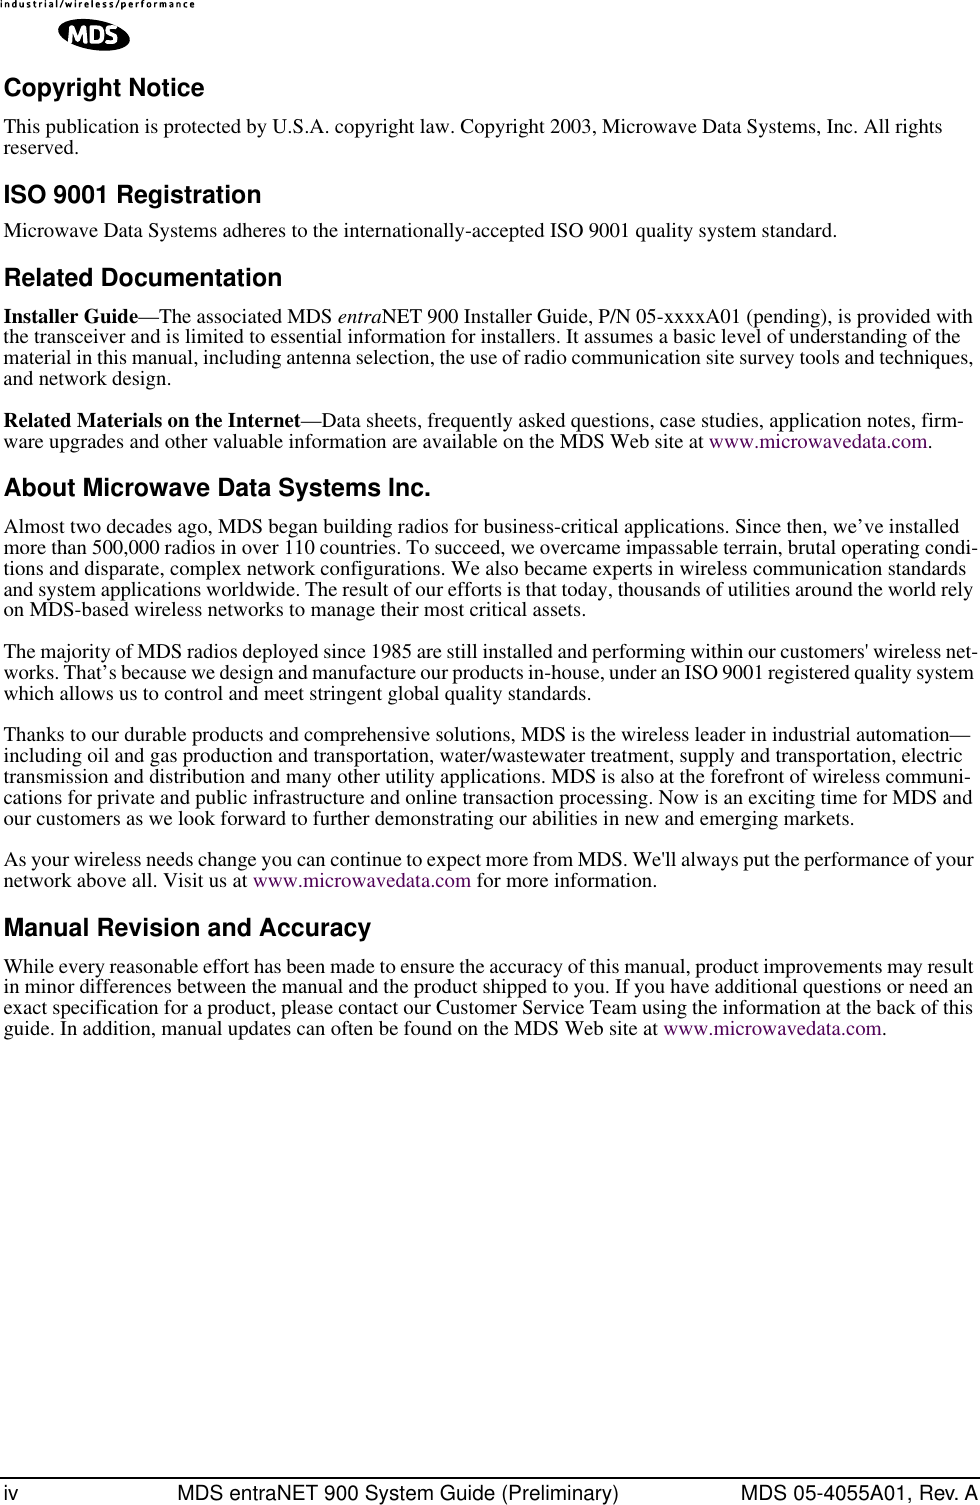  iv MDS entraNET 900 System Guide (Preliminary) MDS 05-4055A01, Rev. A Copyright Notice This publication is protected by U.S.A. copyright law. Copyright 2003, Microwave Data Systems, Inc. All rights reserved. ISO 9001 Registration Microwave Data Systems adheres to the internationally-accepted ISO 9001 quality system standard. Related Documentation Installer Guide —The associated MDS  entra NET 900 Installer Guide, P/N 05-xxxxA01 (pending), is provided with the transceiver and is limited to essential information for installers. It assumes a basic level of understanding of the material in this manual, including antenna selection, the use of radio communication site survey tools and techniques, and network design. Related Materials on the Internet —Data sheets, frequently asked questions, case studies, application notes, firm-ware upgrades and other valuable information are available on the MDS Web site at www.microwavedata.com. About Microwave Data Systems Inc. Almost two decades ago, MDS began building radios for business-critical applications. Since then, we’ve installed more than 500,000 radios in over 110 countries. To succeed, we overcame impassable terrain, brutal operating condi-tions and disparate, complex network configurations. We also became experts in wireless communication standards and system applications worldwide. The result of our efforts is that today, thousands of utilities around the world rely on MDS-based wireless networks to manage their most critical assets.The majority of MDS radios deployed since 1985 are still installed and performing within our customers&apos; wireless net-works. That’s because we design and manufacture our products in-house, under an ISO 9001 registered quality system which allows us to control and meet stringent global quality standards. Thanks to our durable products and comprehensive solutions, MDS is the wireless leader in industrial automation—including oil and gas production and transportation, water/wastewater treatment, supply and transportation, electric transmission and distribution and many other utility applications. MDS is also at the forefront of wireless communi-cations for private and public infrastructure and online transaction processing. Now is an exciting time for MDS and our customers as we look forward to further demonstrating our abilities in new and emerging markets.As your wireless needs change you can continue to expect more from MDS. We&apos;ll always put the performance of your network above all. Visit us at www.microwavedata.com for more information. Manual Revision and Accuracy While every reasonable effort has been made to ensure the accuracy of this manual, product improvements may result in minor differences between the manual and the product shipped to you. If you have additional questions or need an exact specification for a product, please contact our Customer Service Team using the information at the back of this guide. In addition, manual updates can often be found on the MDS Web site at www.microwavedata.com.